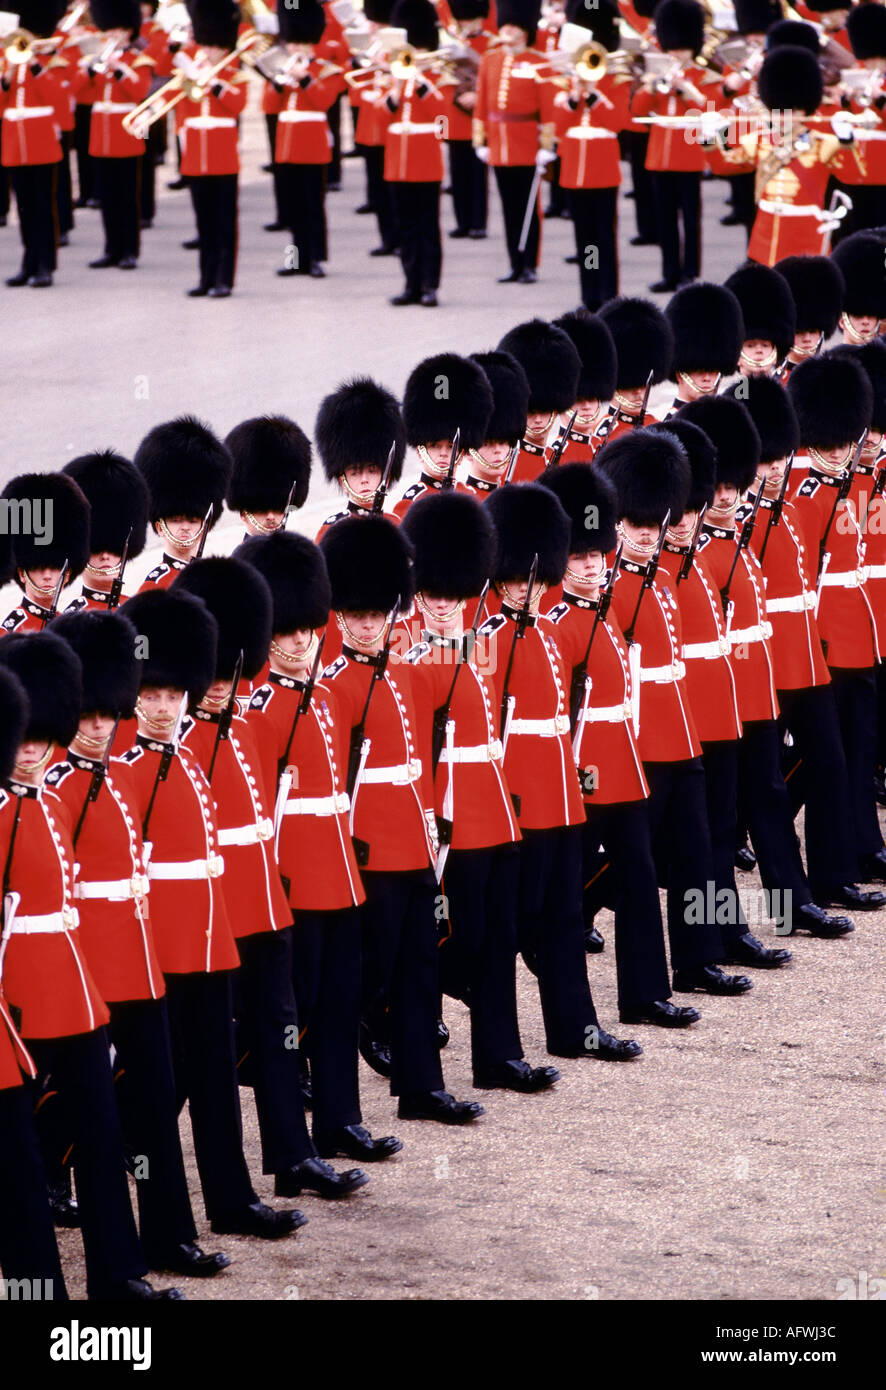 British soldiers in ceremonial uniform London Uk  Trooping the Colour on Horse Guards Parade Household Cavalry circa June 1985 1980s HOMER SYKES Stock Photo